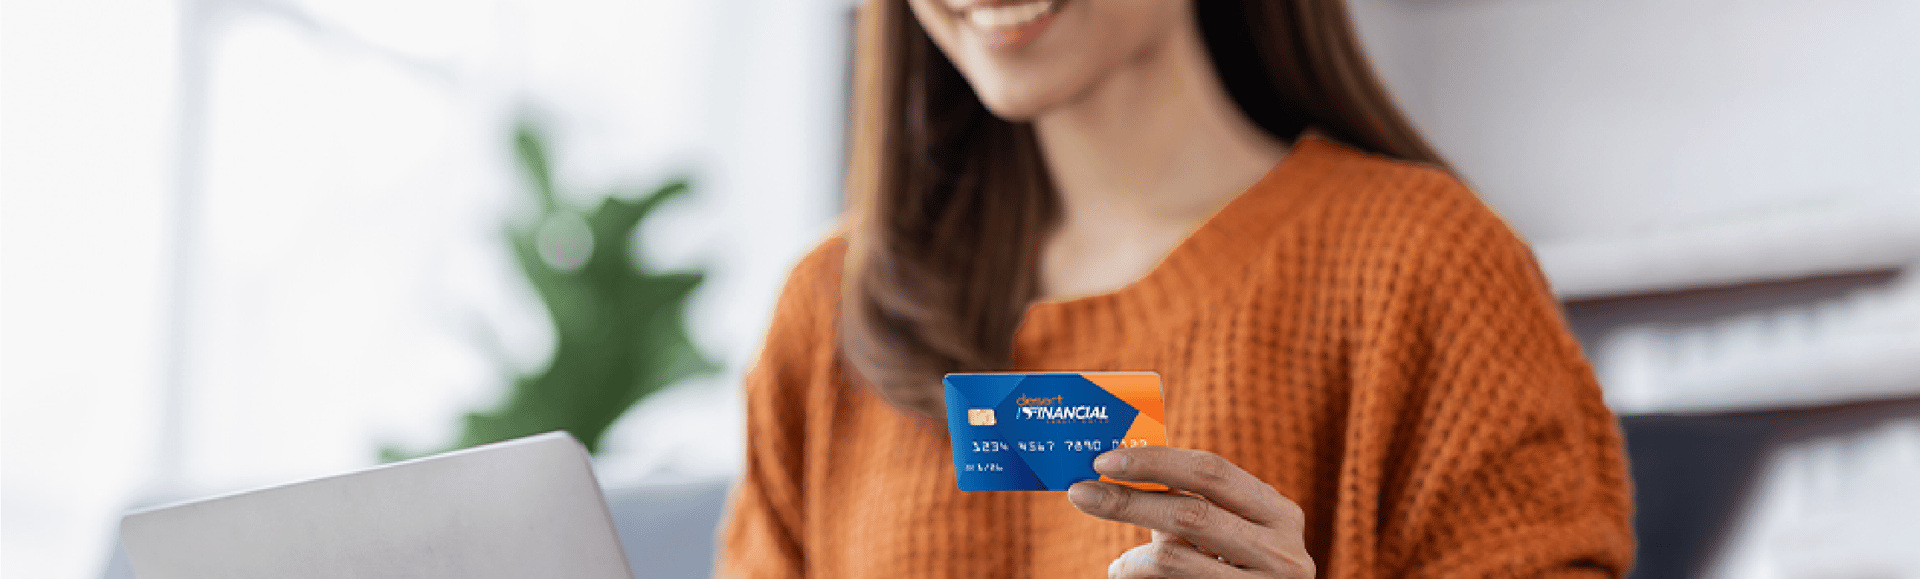 A woman in an orange sweater presents a Desert Financial credit card to the camera.